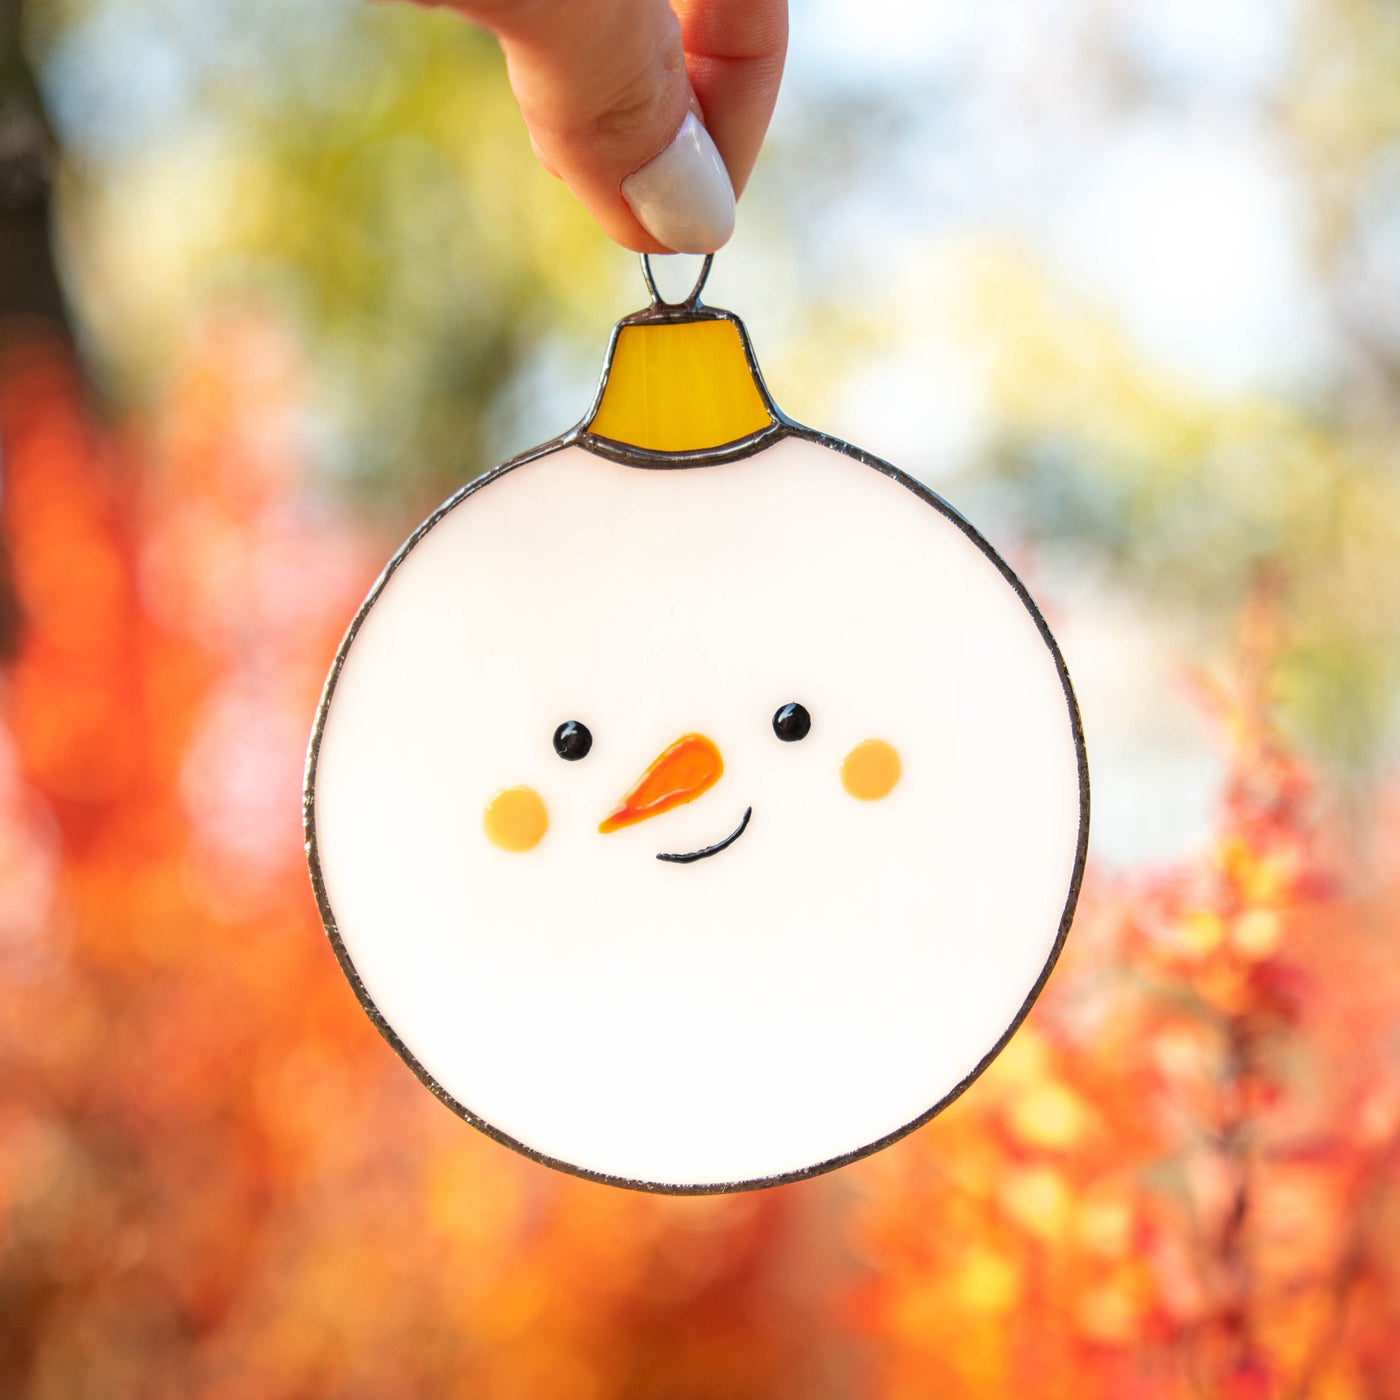 Stained glass round snowman suncatcher for Christmas celebration